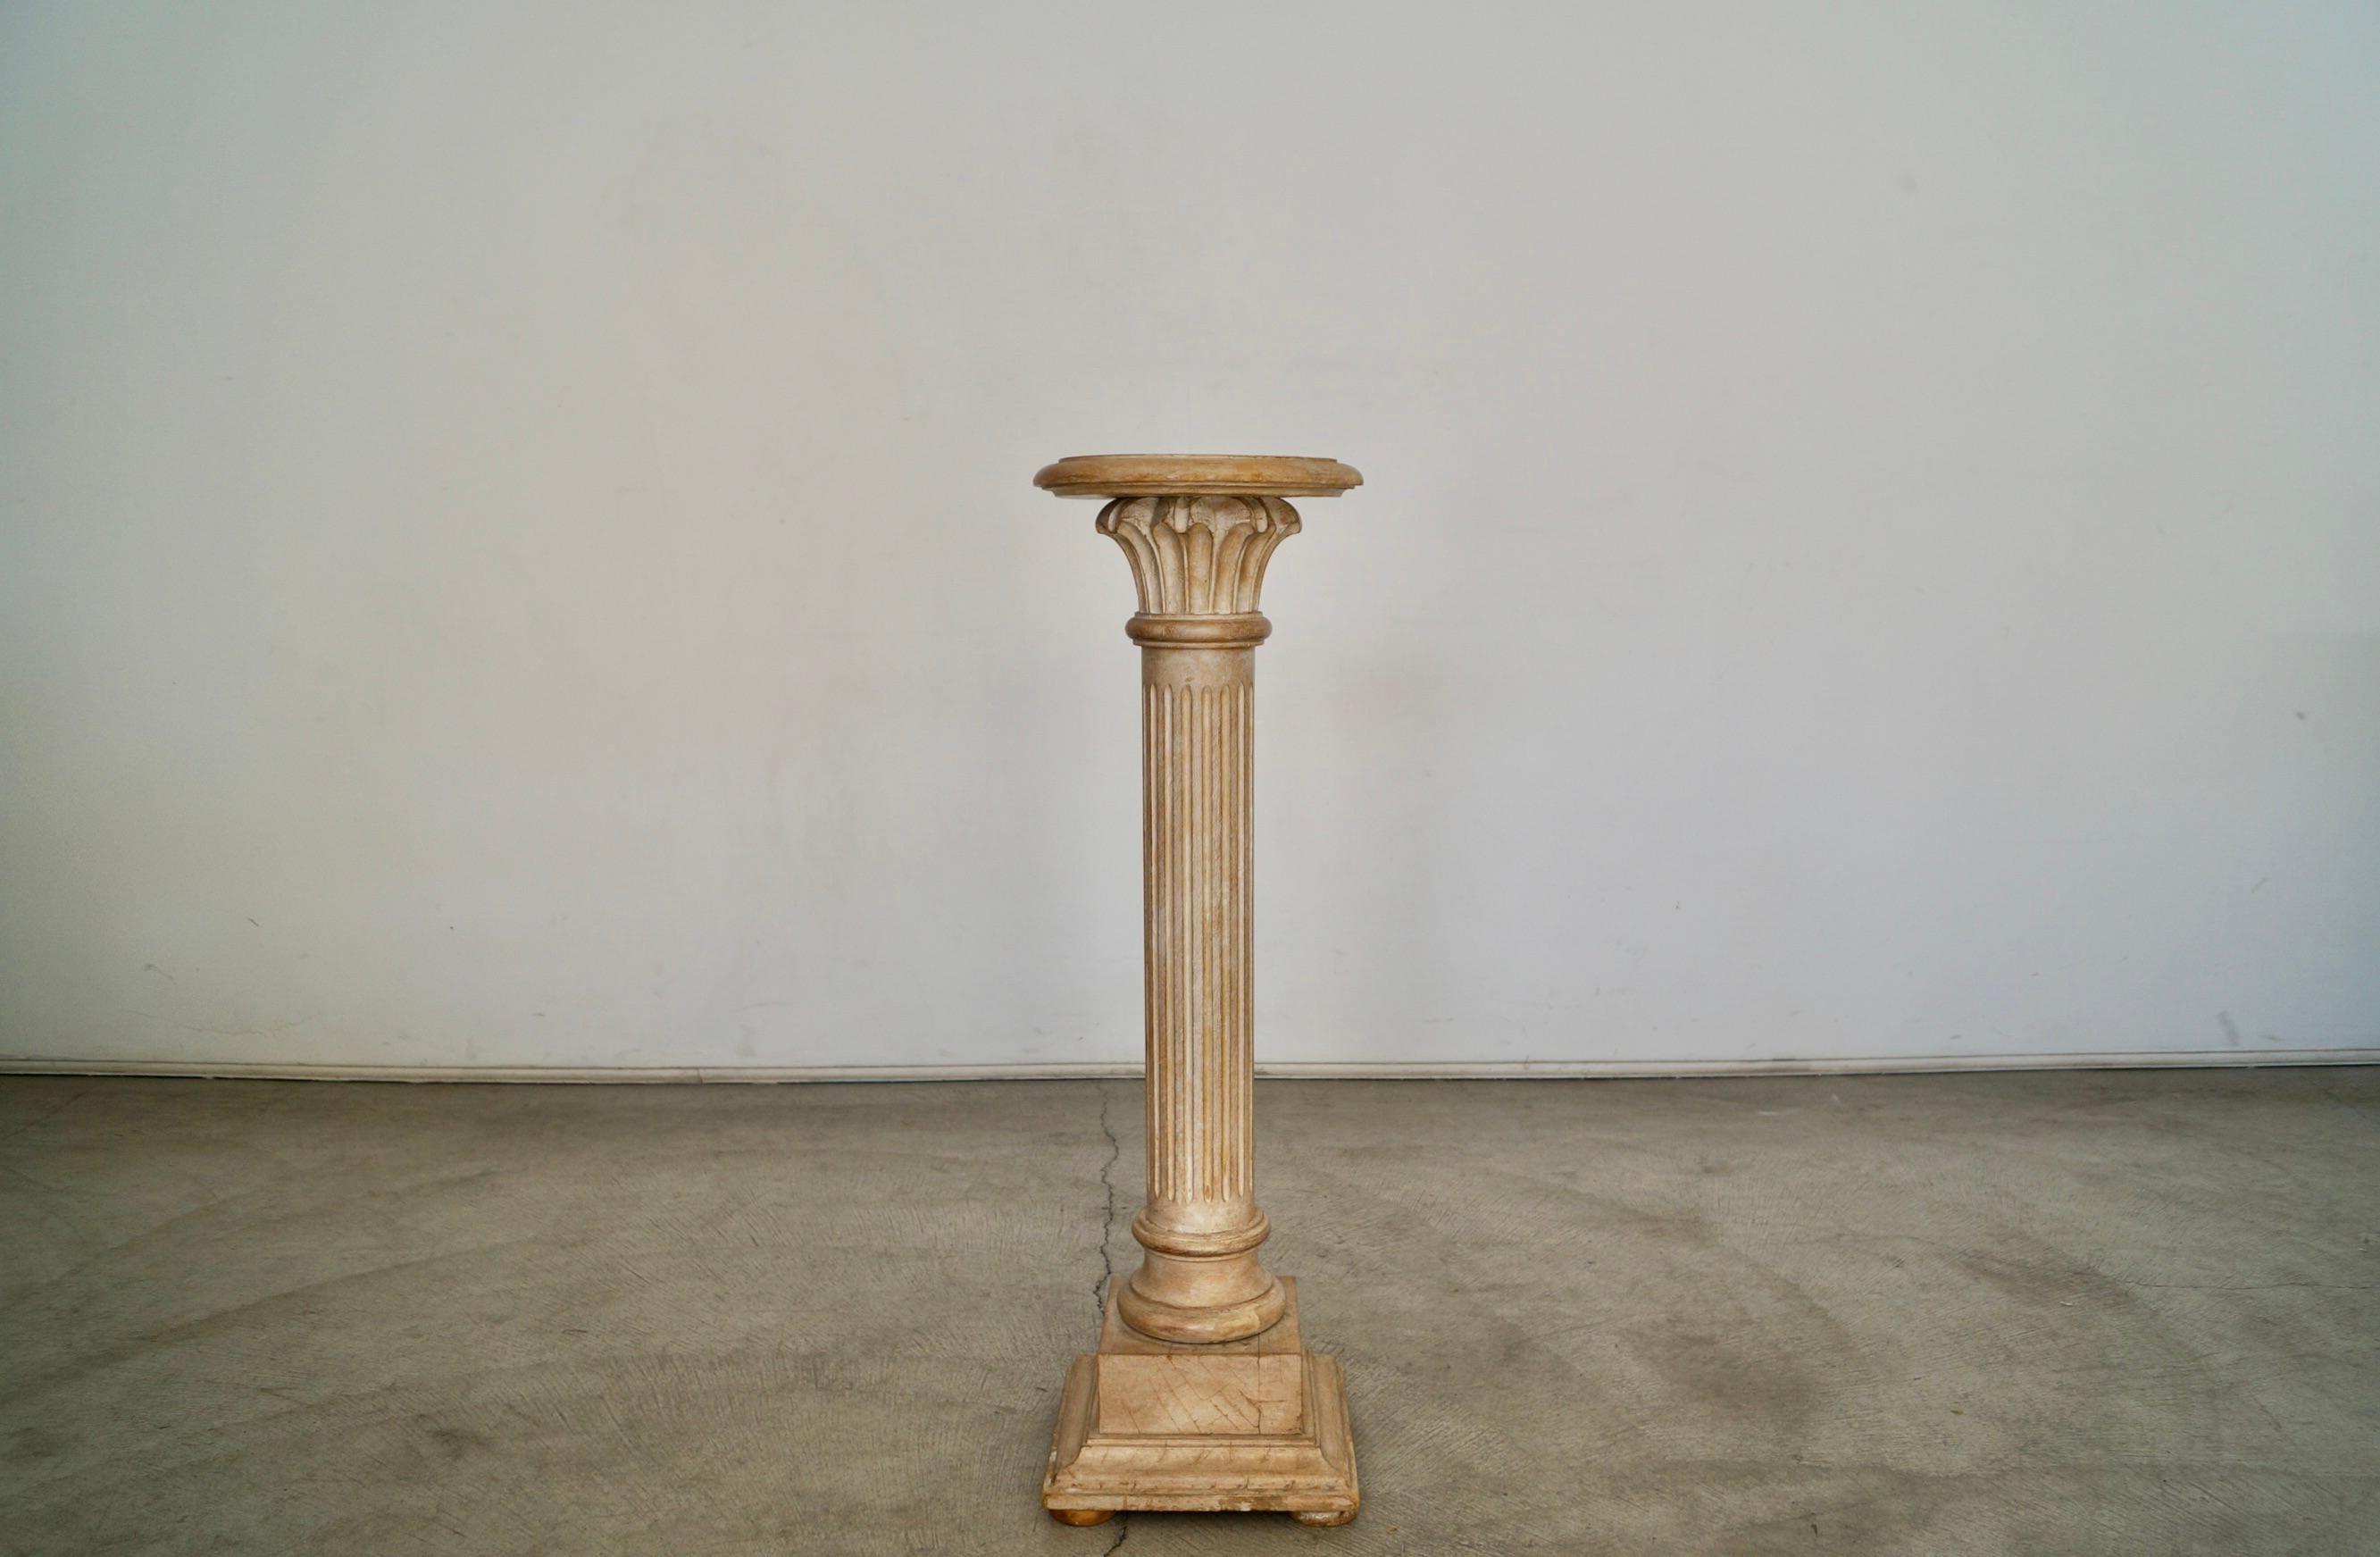 Vintage solid wood pedestal for sale. Made in Italy, and a beautiful Italian style and design. Looks like a Roman column, and has a beautiful aesthetic and finish. It’s washed in white over natural wood to give it a nice Old World finish. It’s in